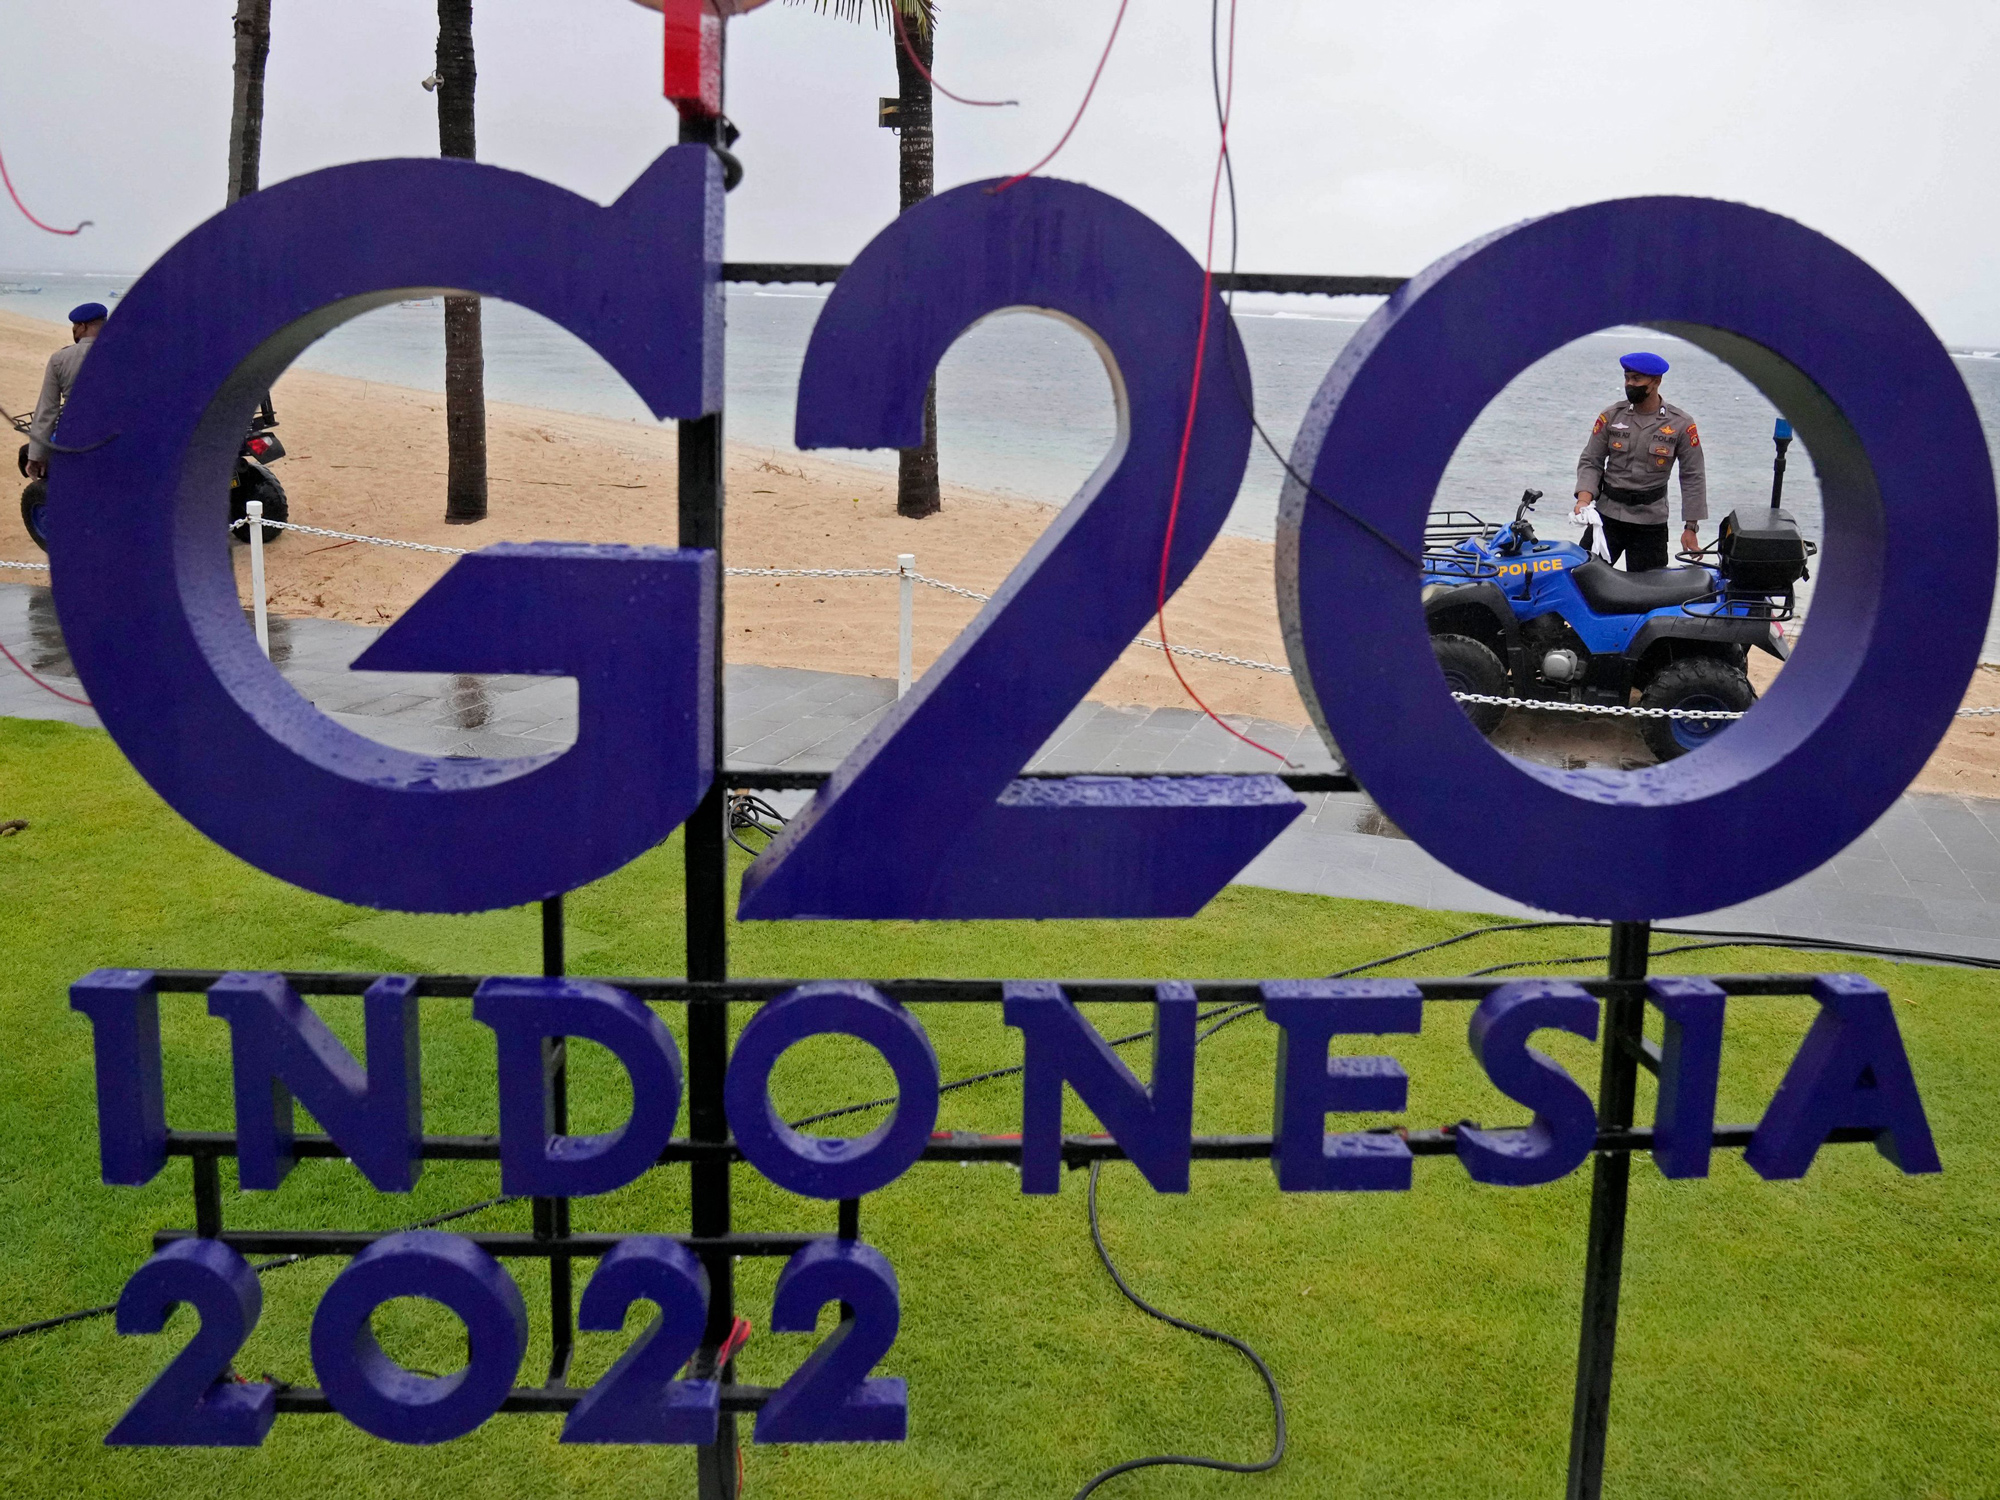 Indonesia Says 17 State Leaders Confirmed to Attend G-20 Summit